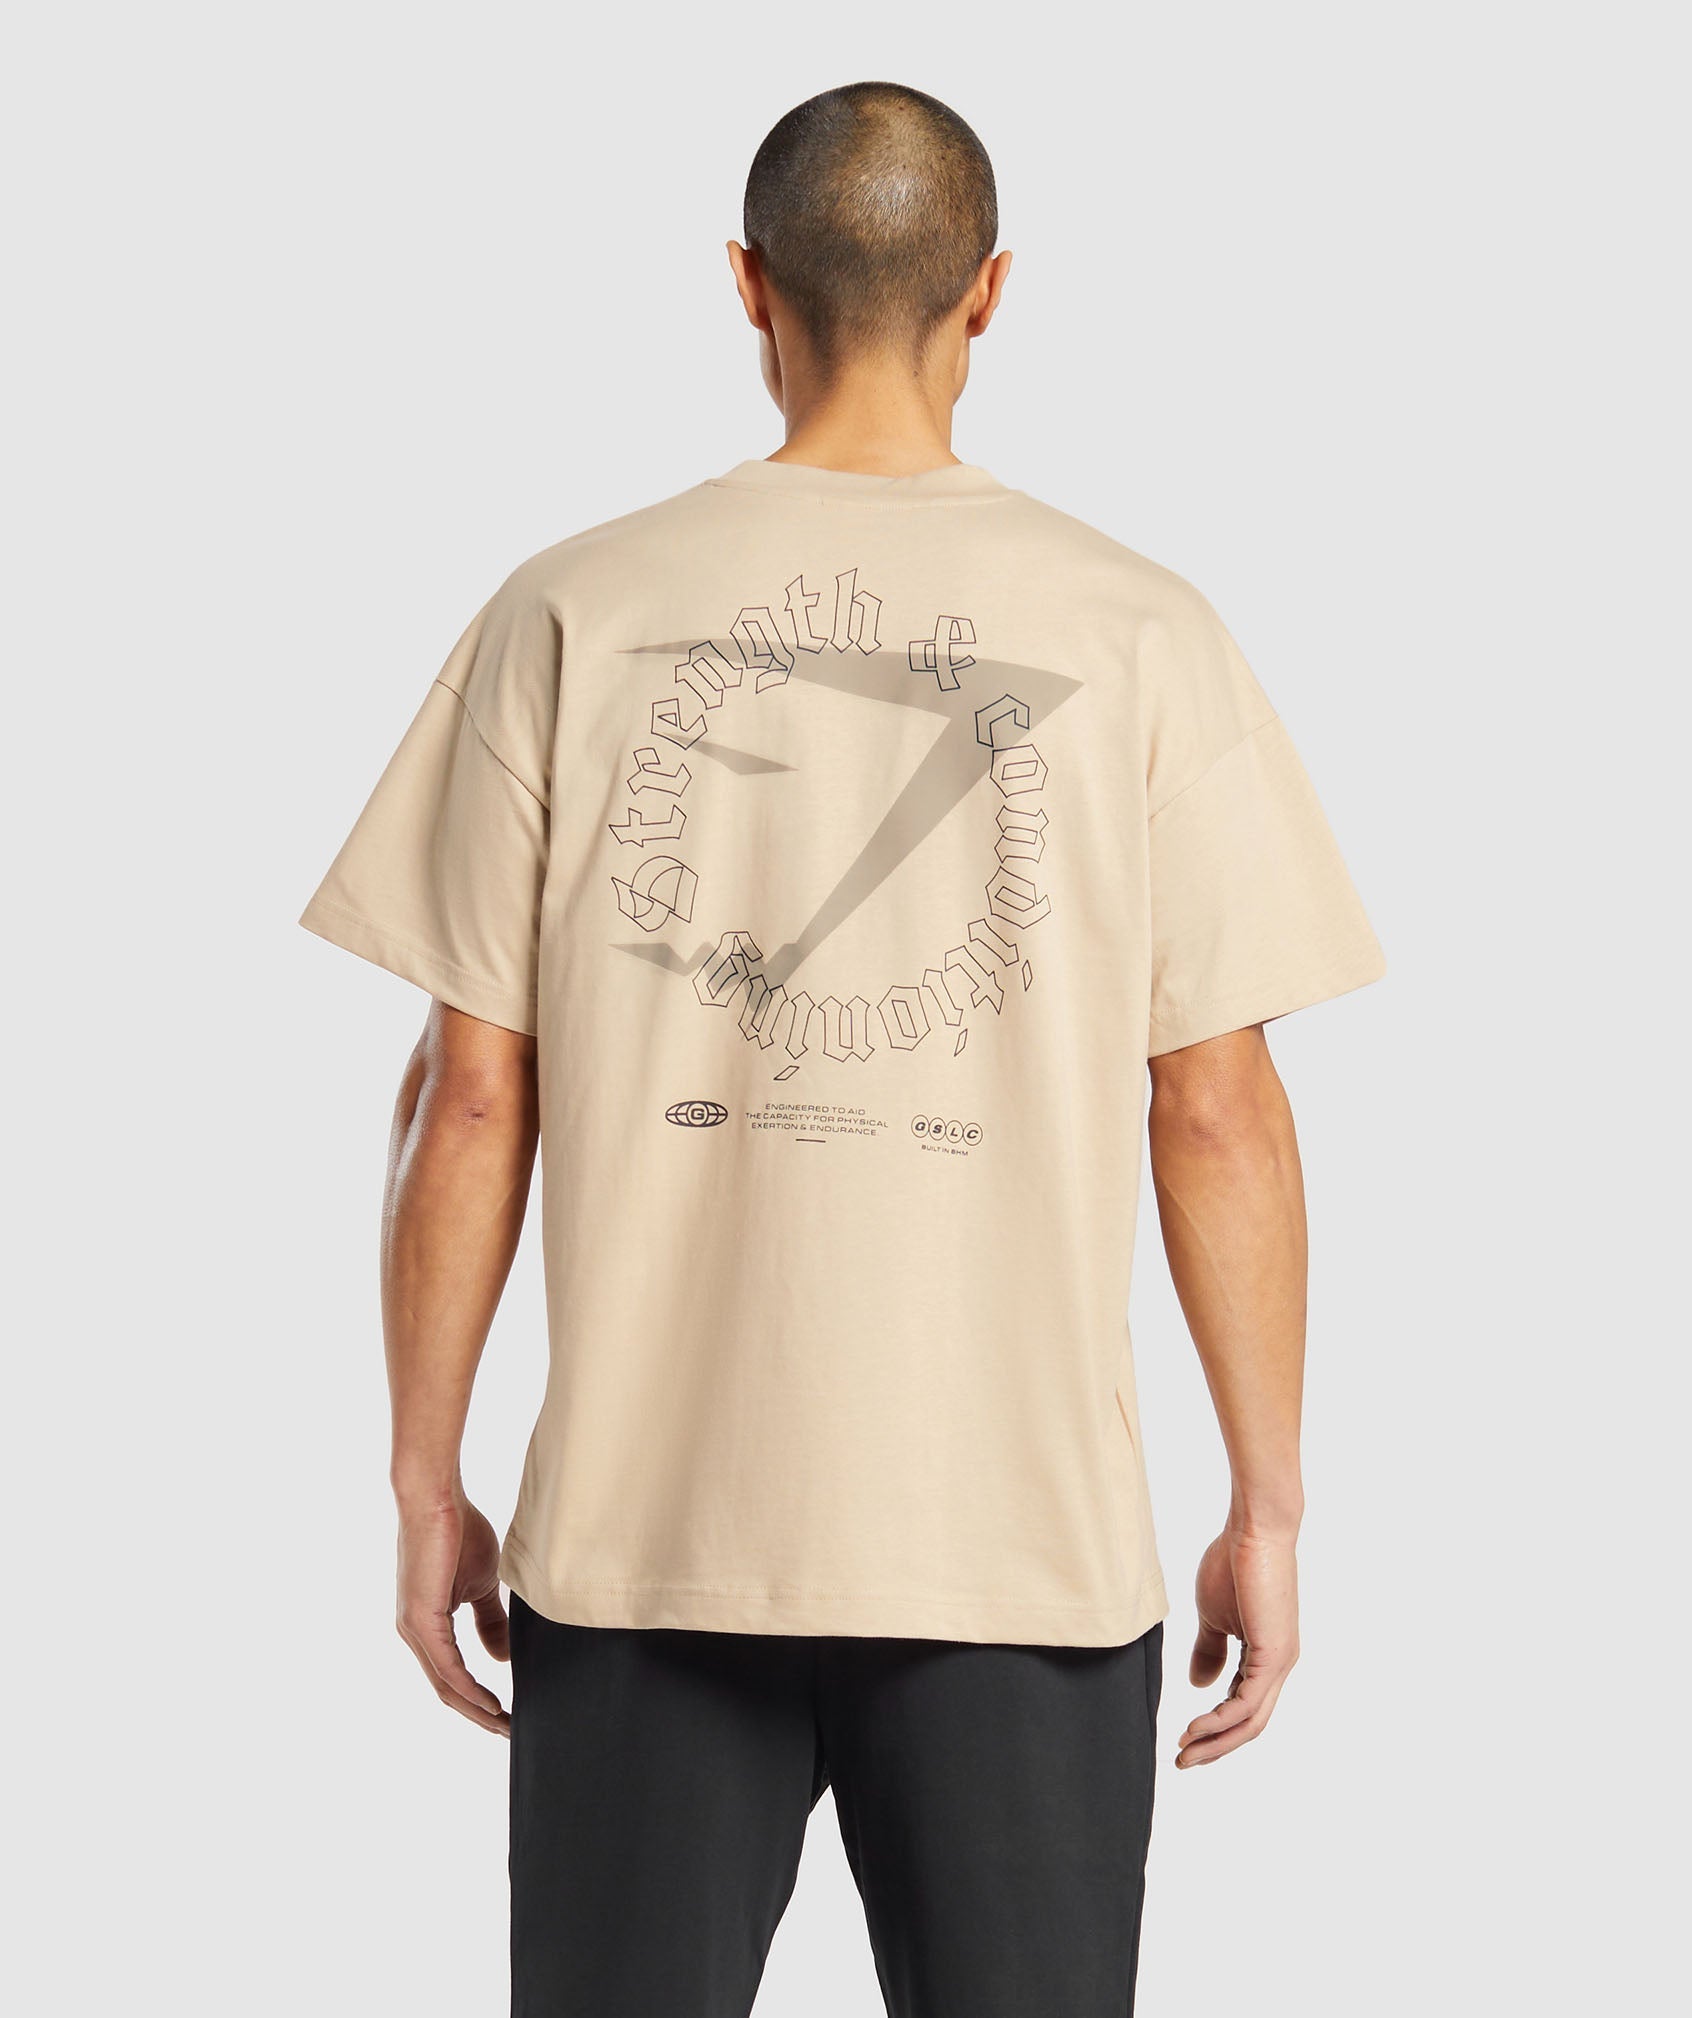 Strength and Conditioning T-Shirt in Vanilla Beige - view 1